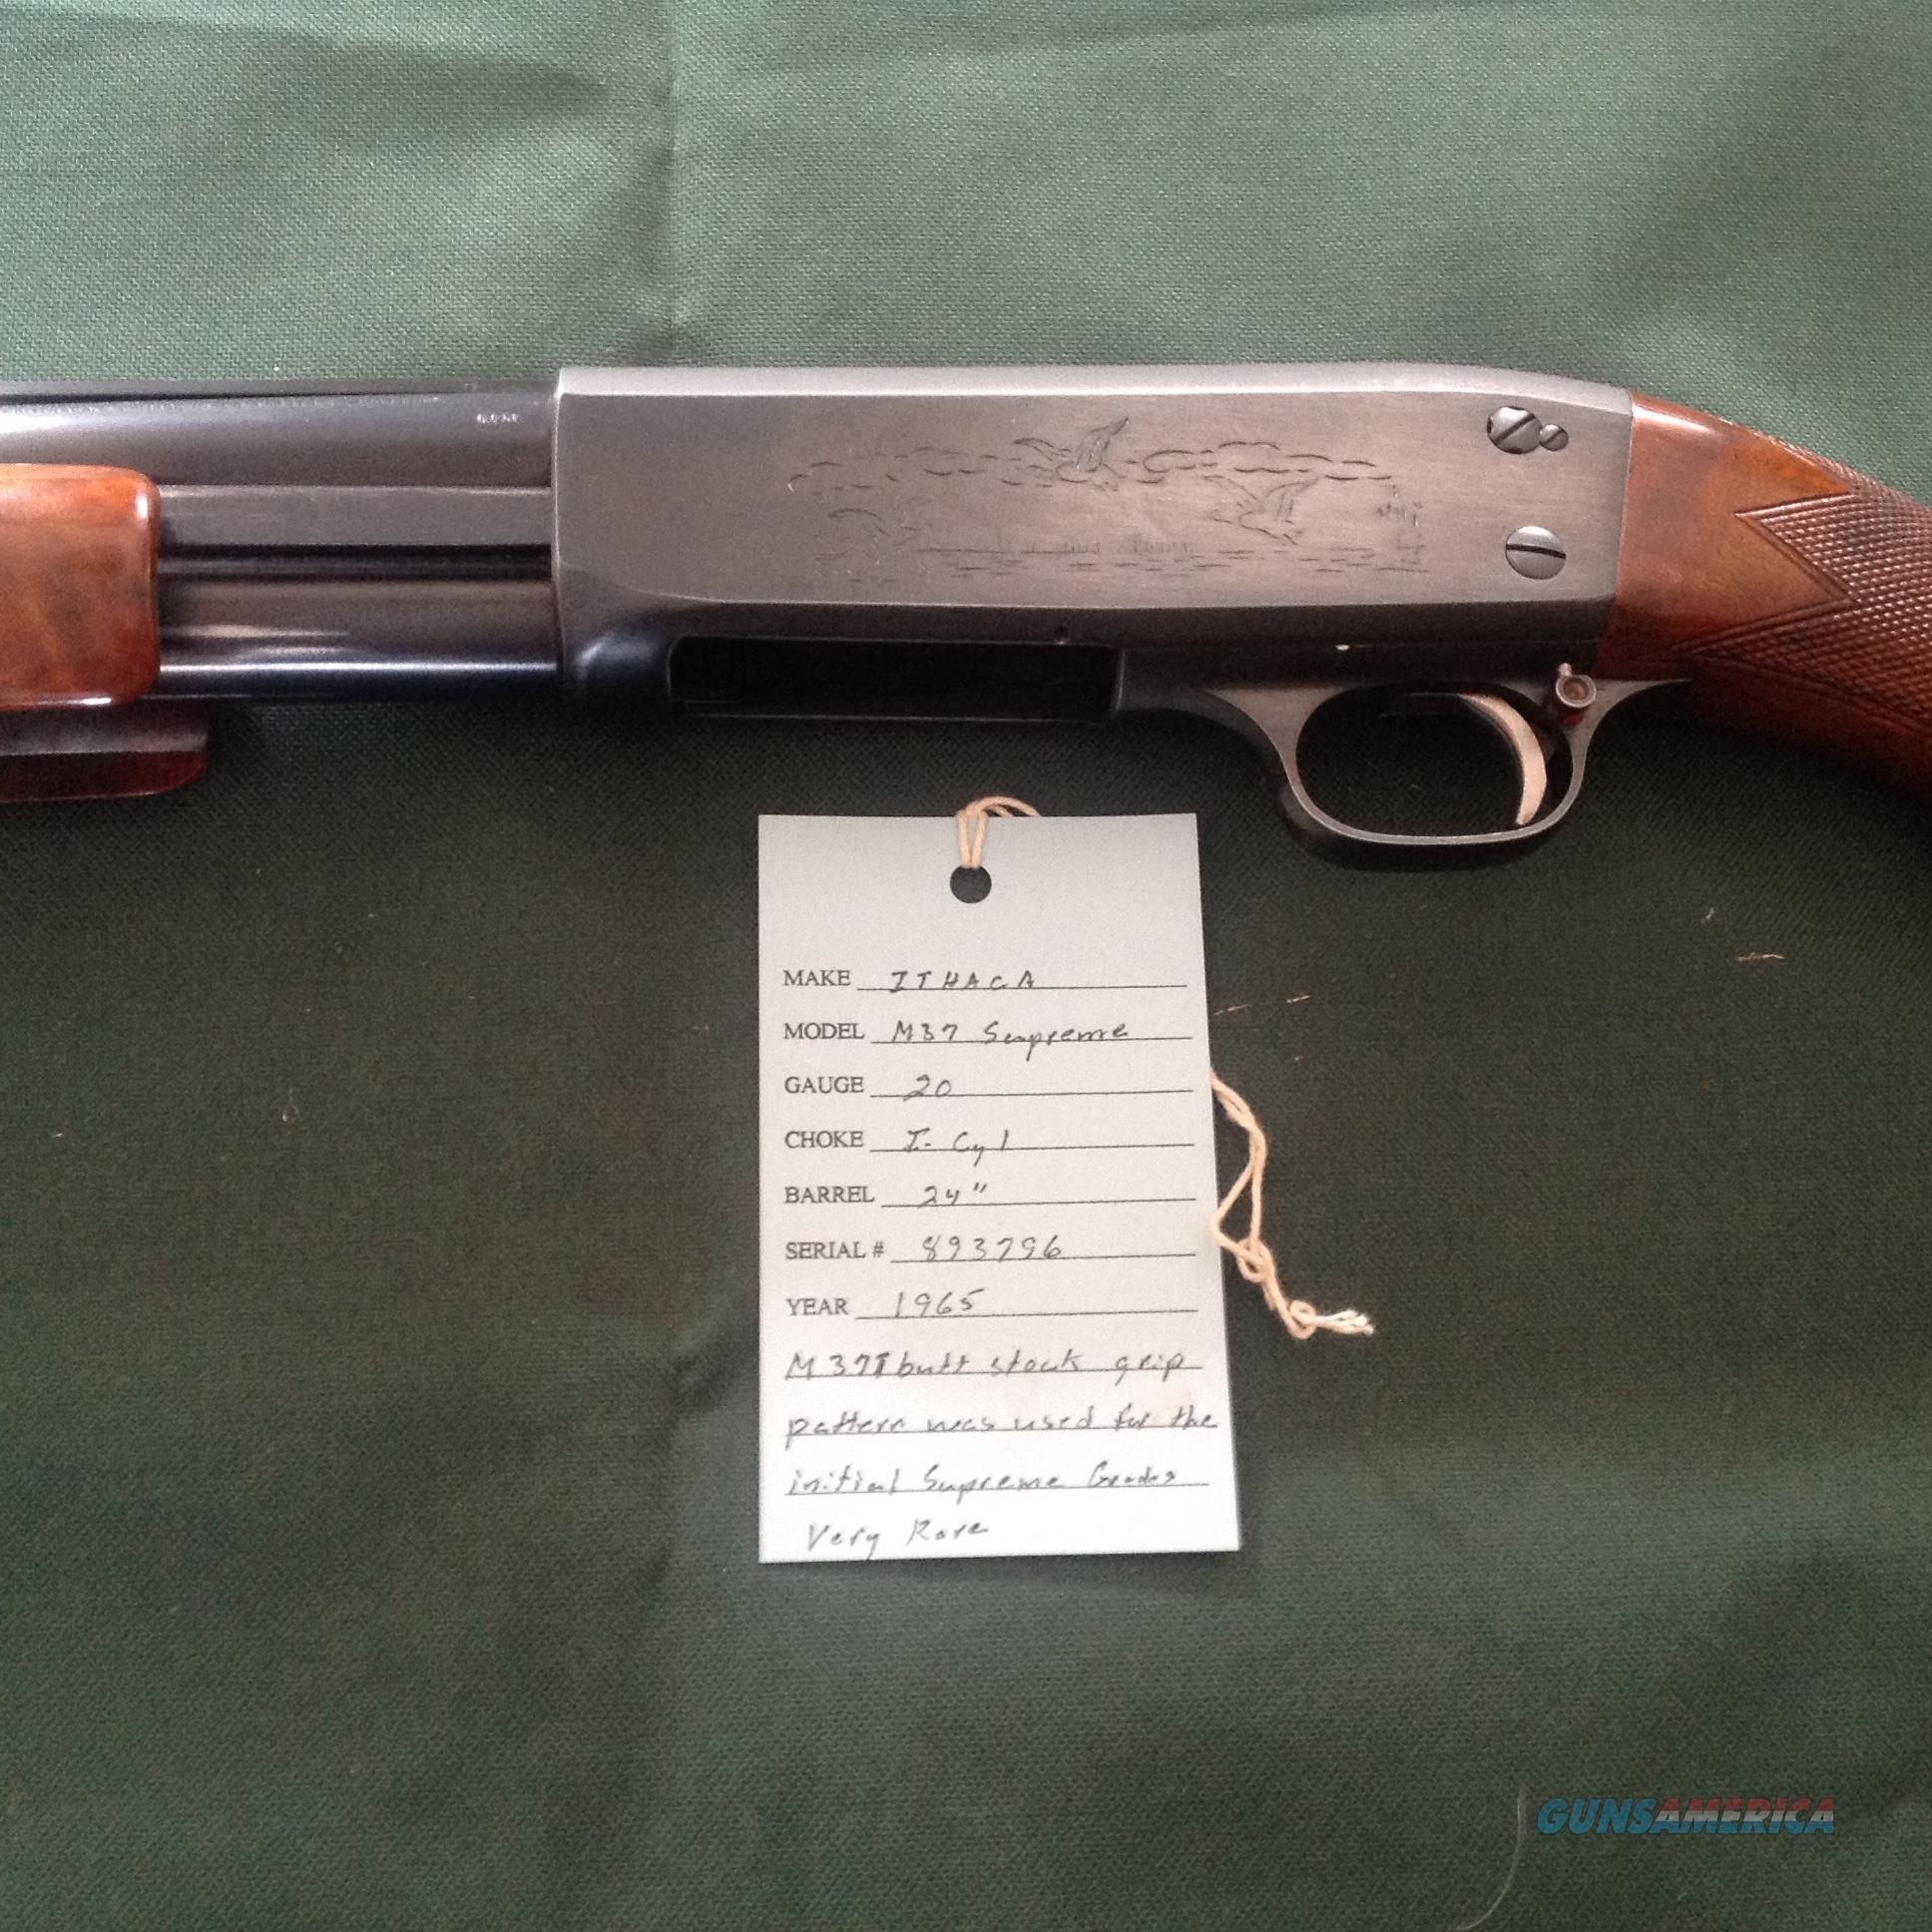 ithaca 37 serial number dates